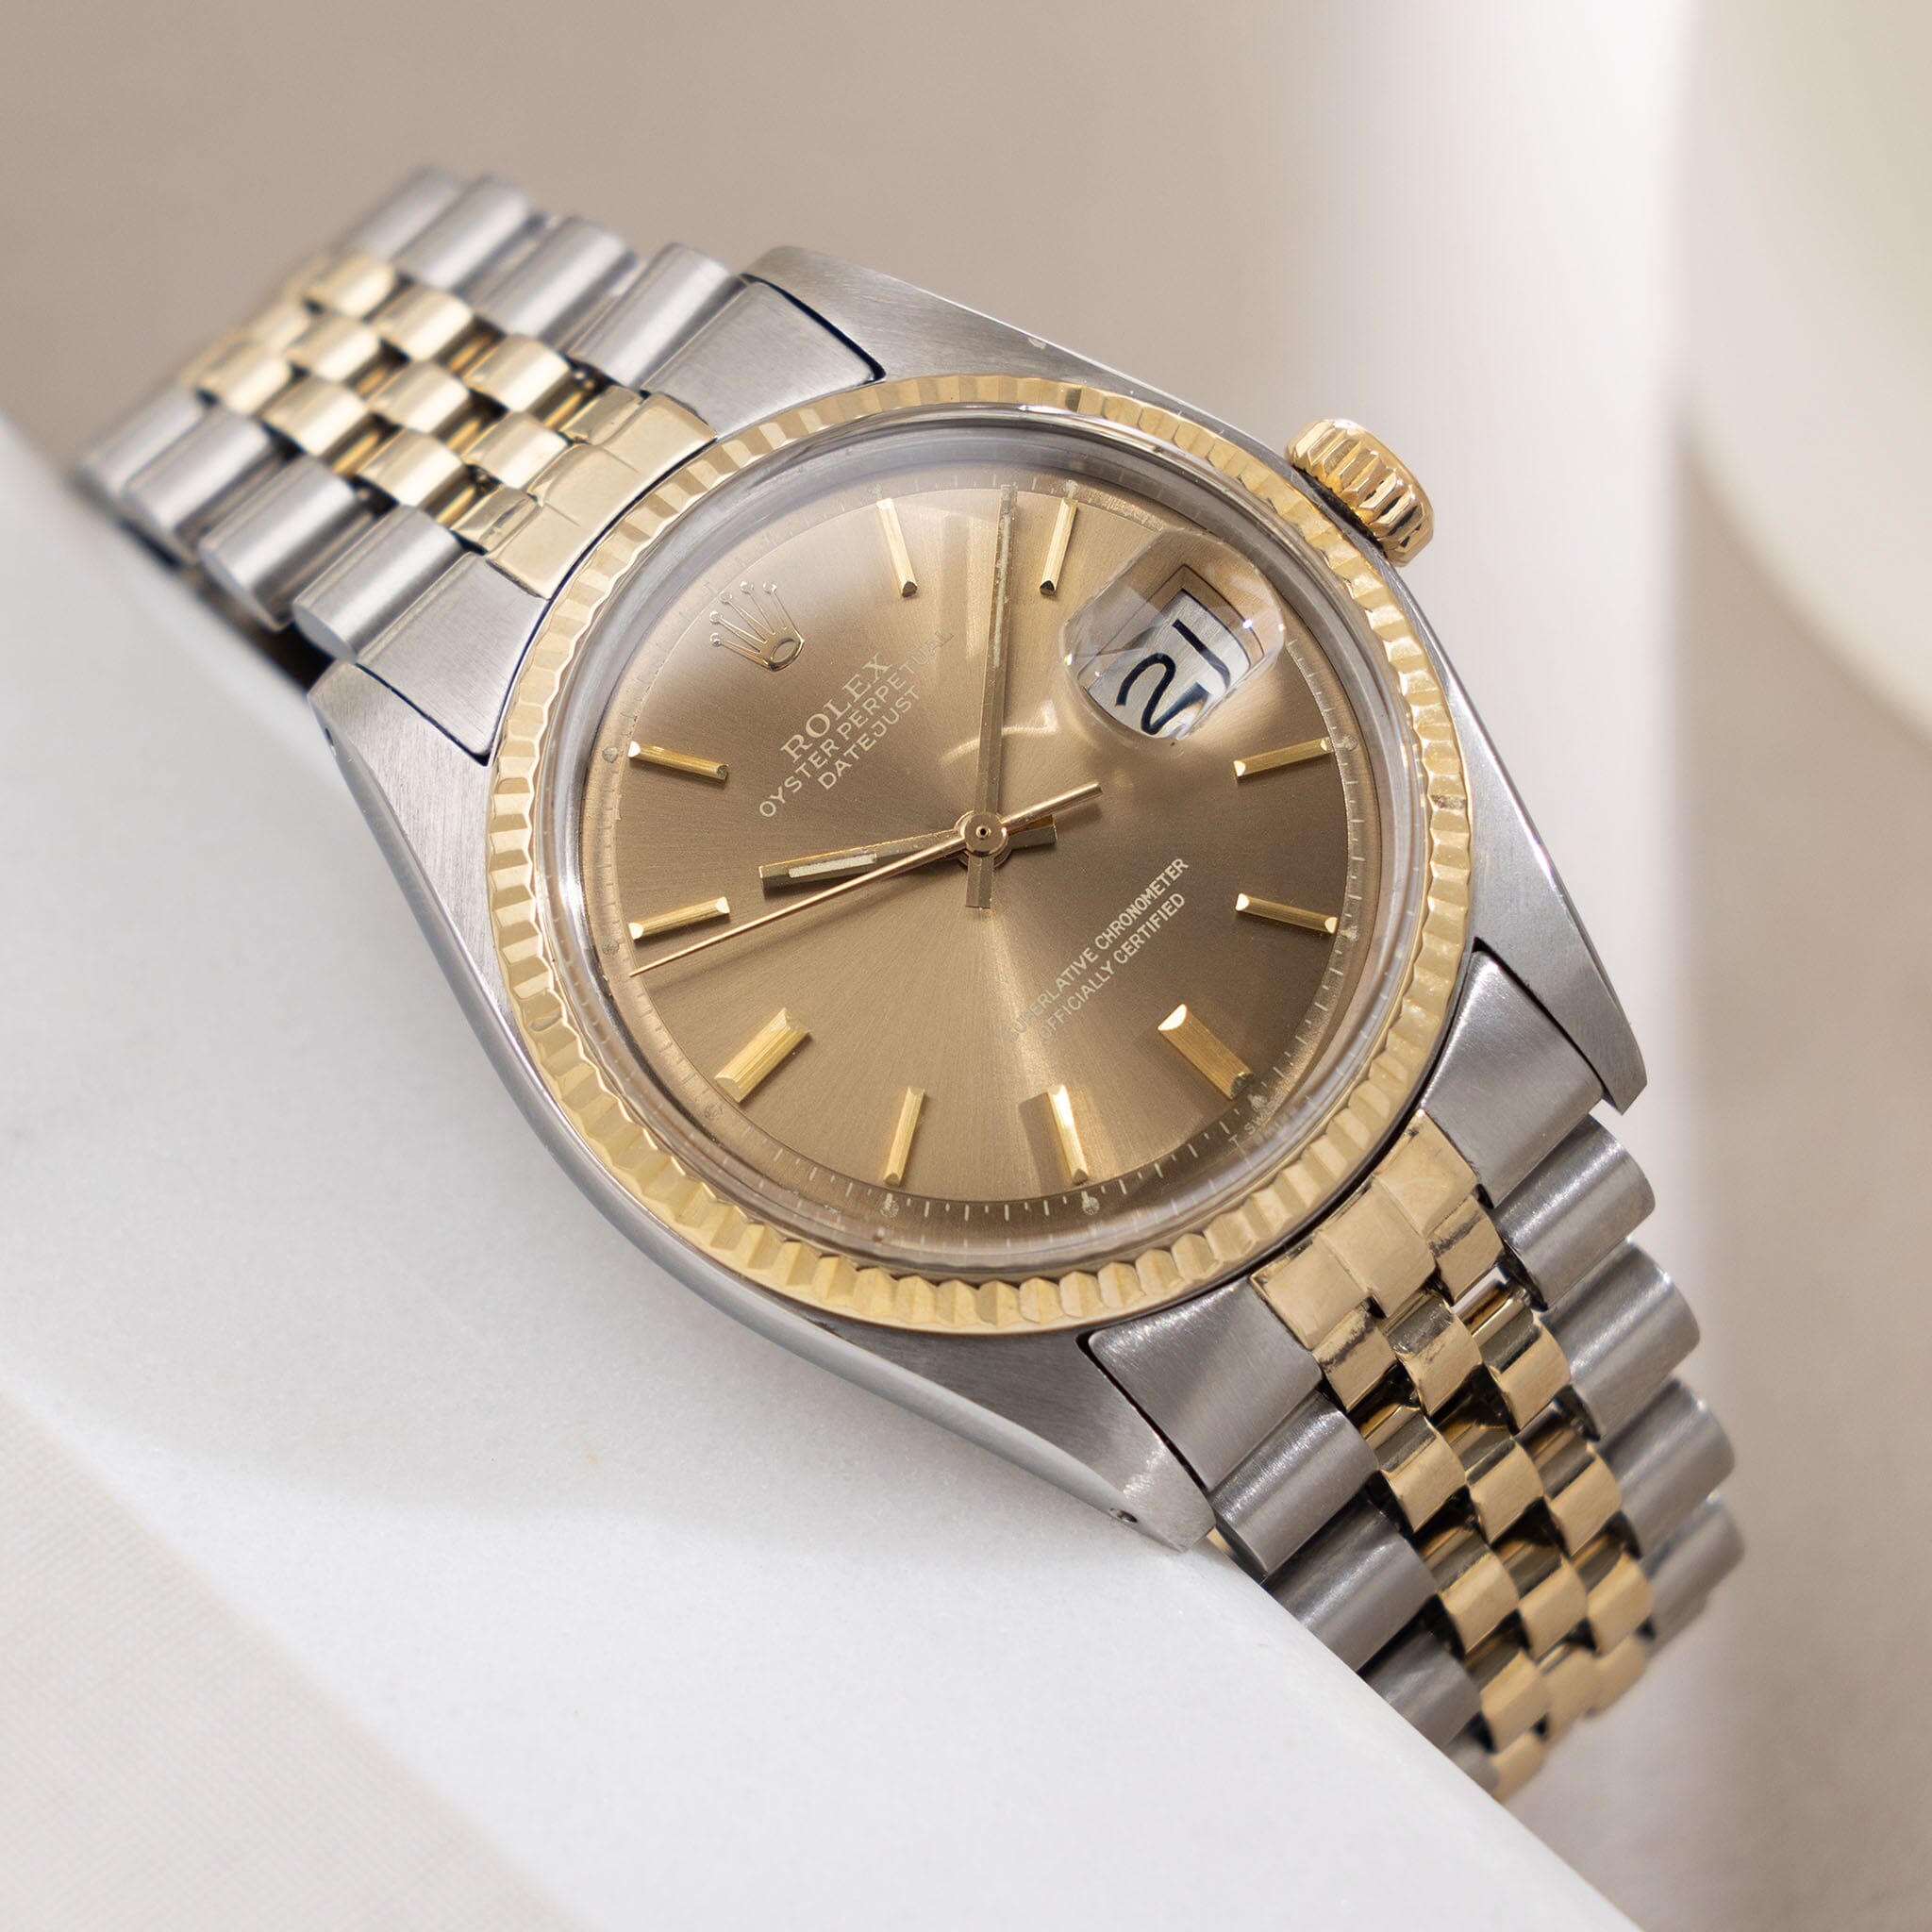 Rolex Datejust Steel and Gold Cappuccino Dial Ref 1601